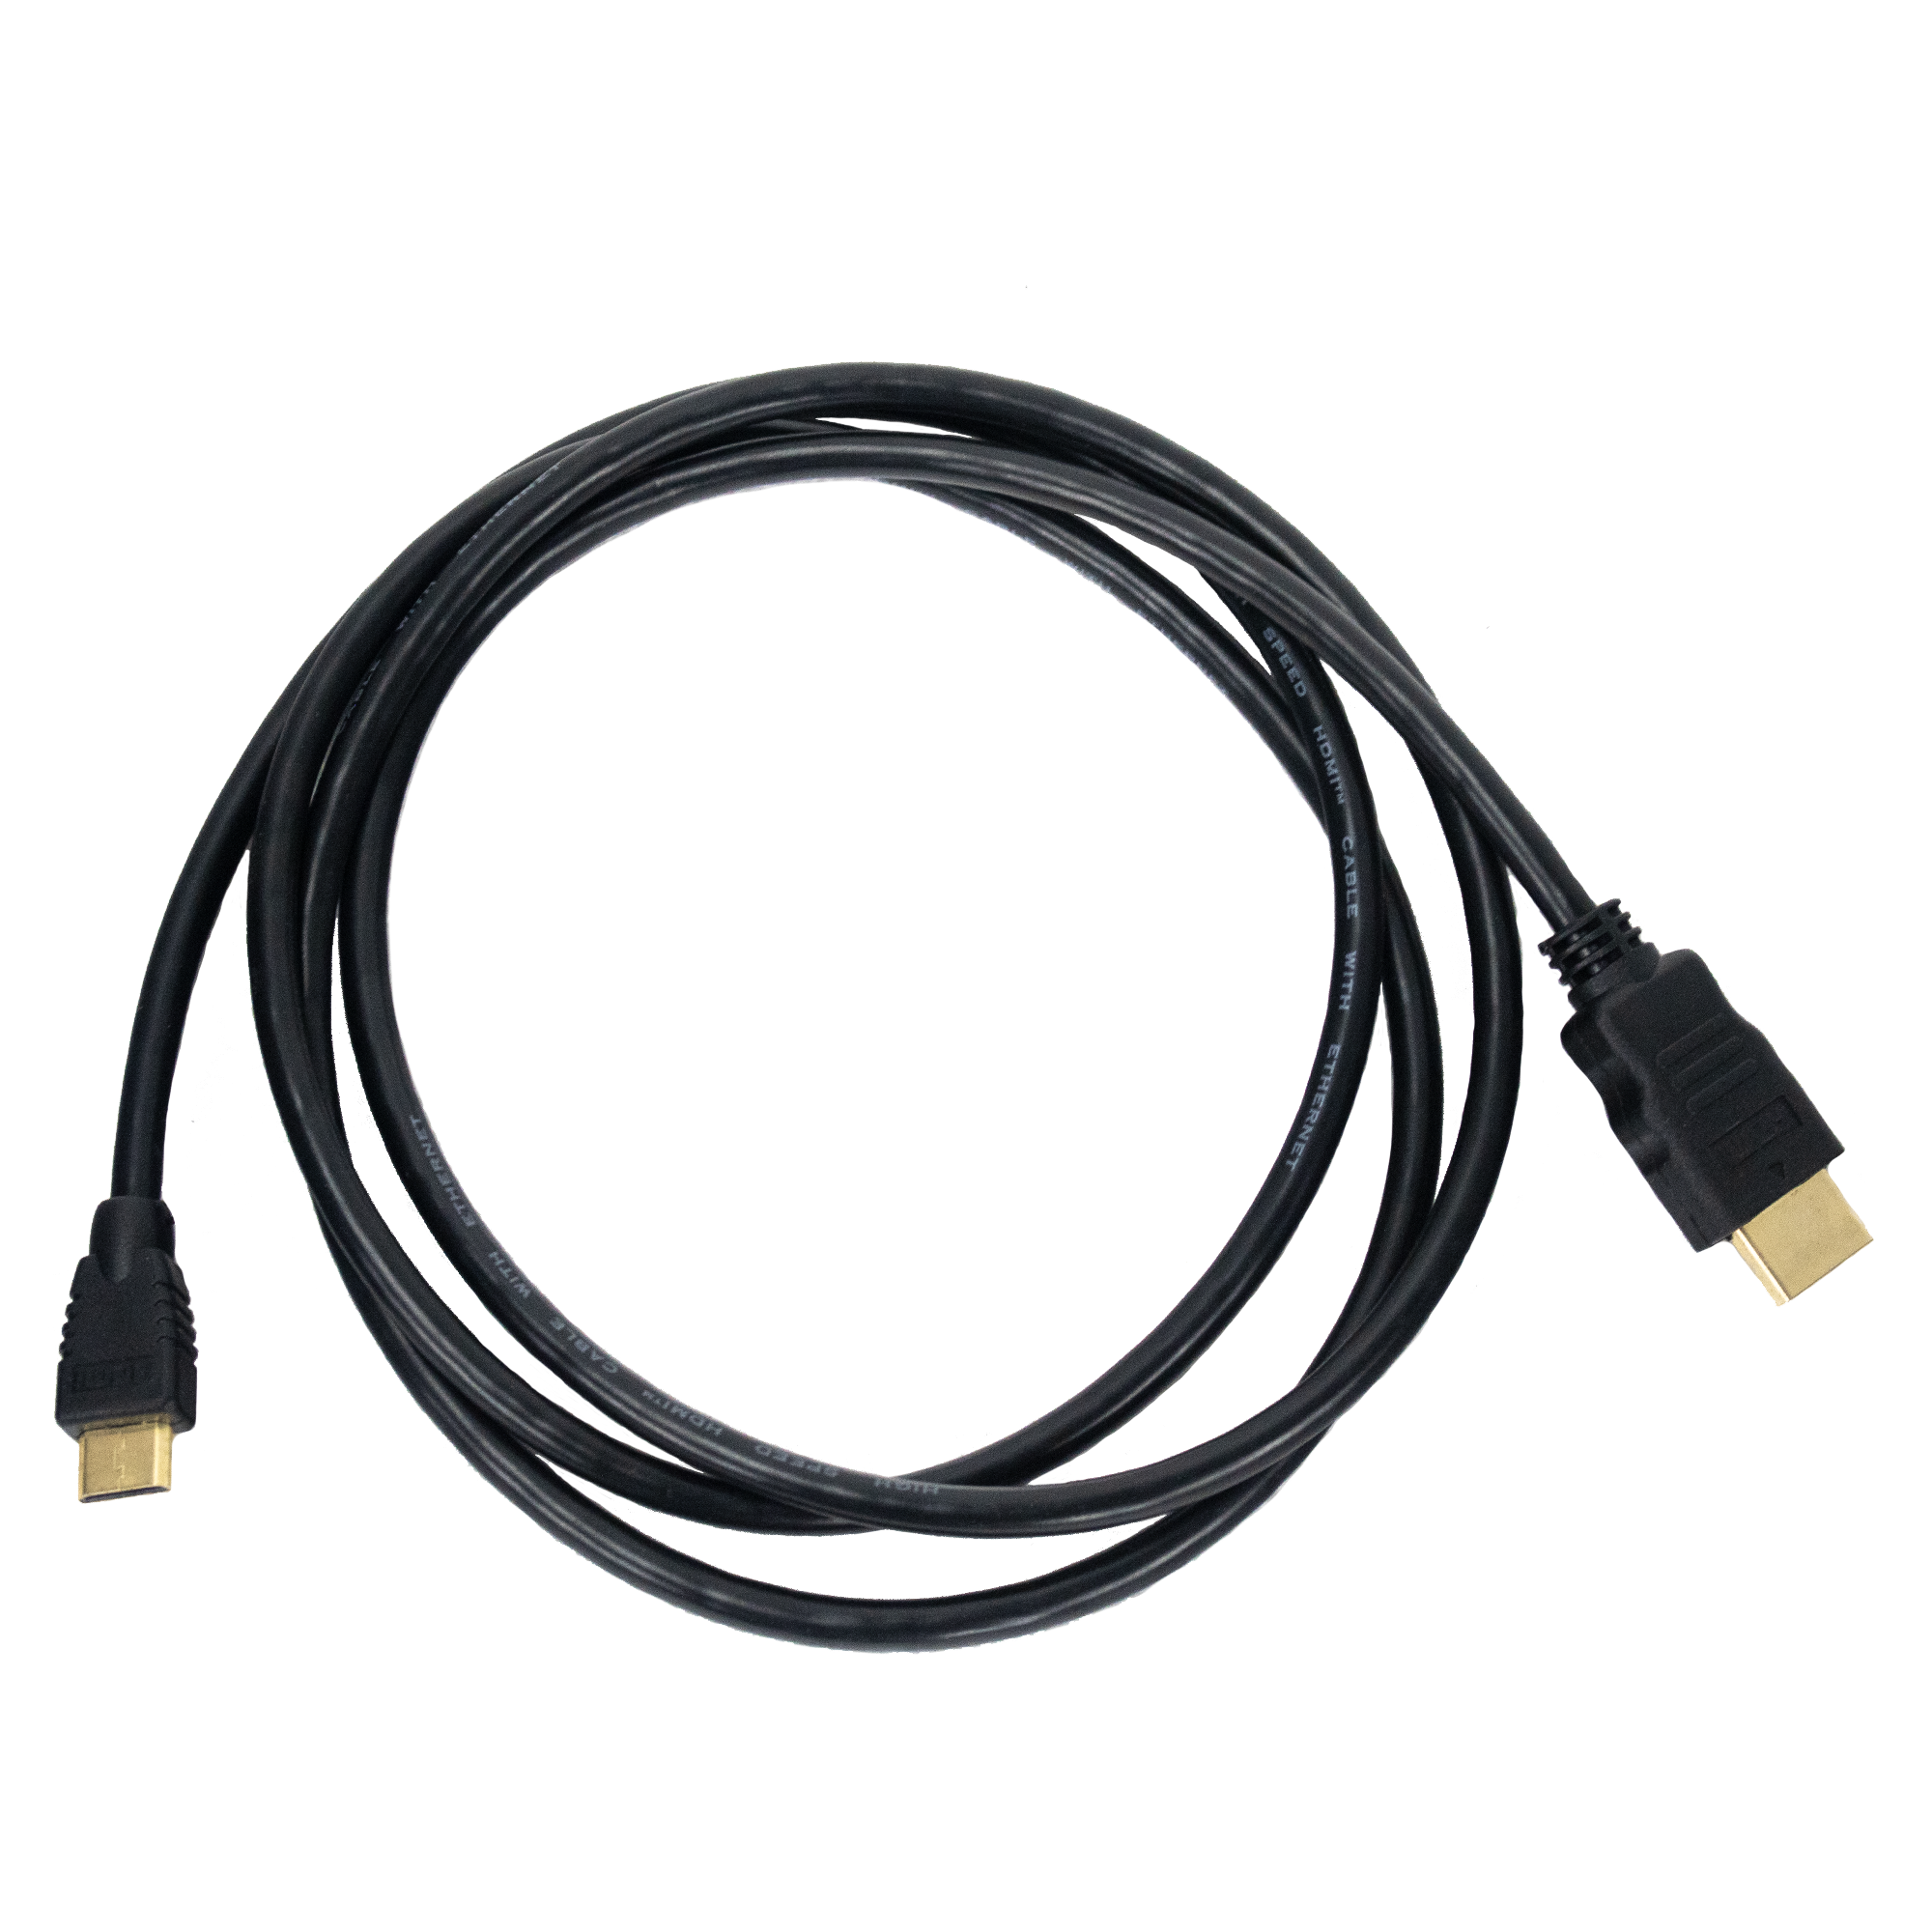 10 ft. High Speed Mini-HDMI to HDMI Cable with Ethernet